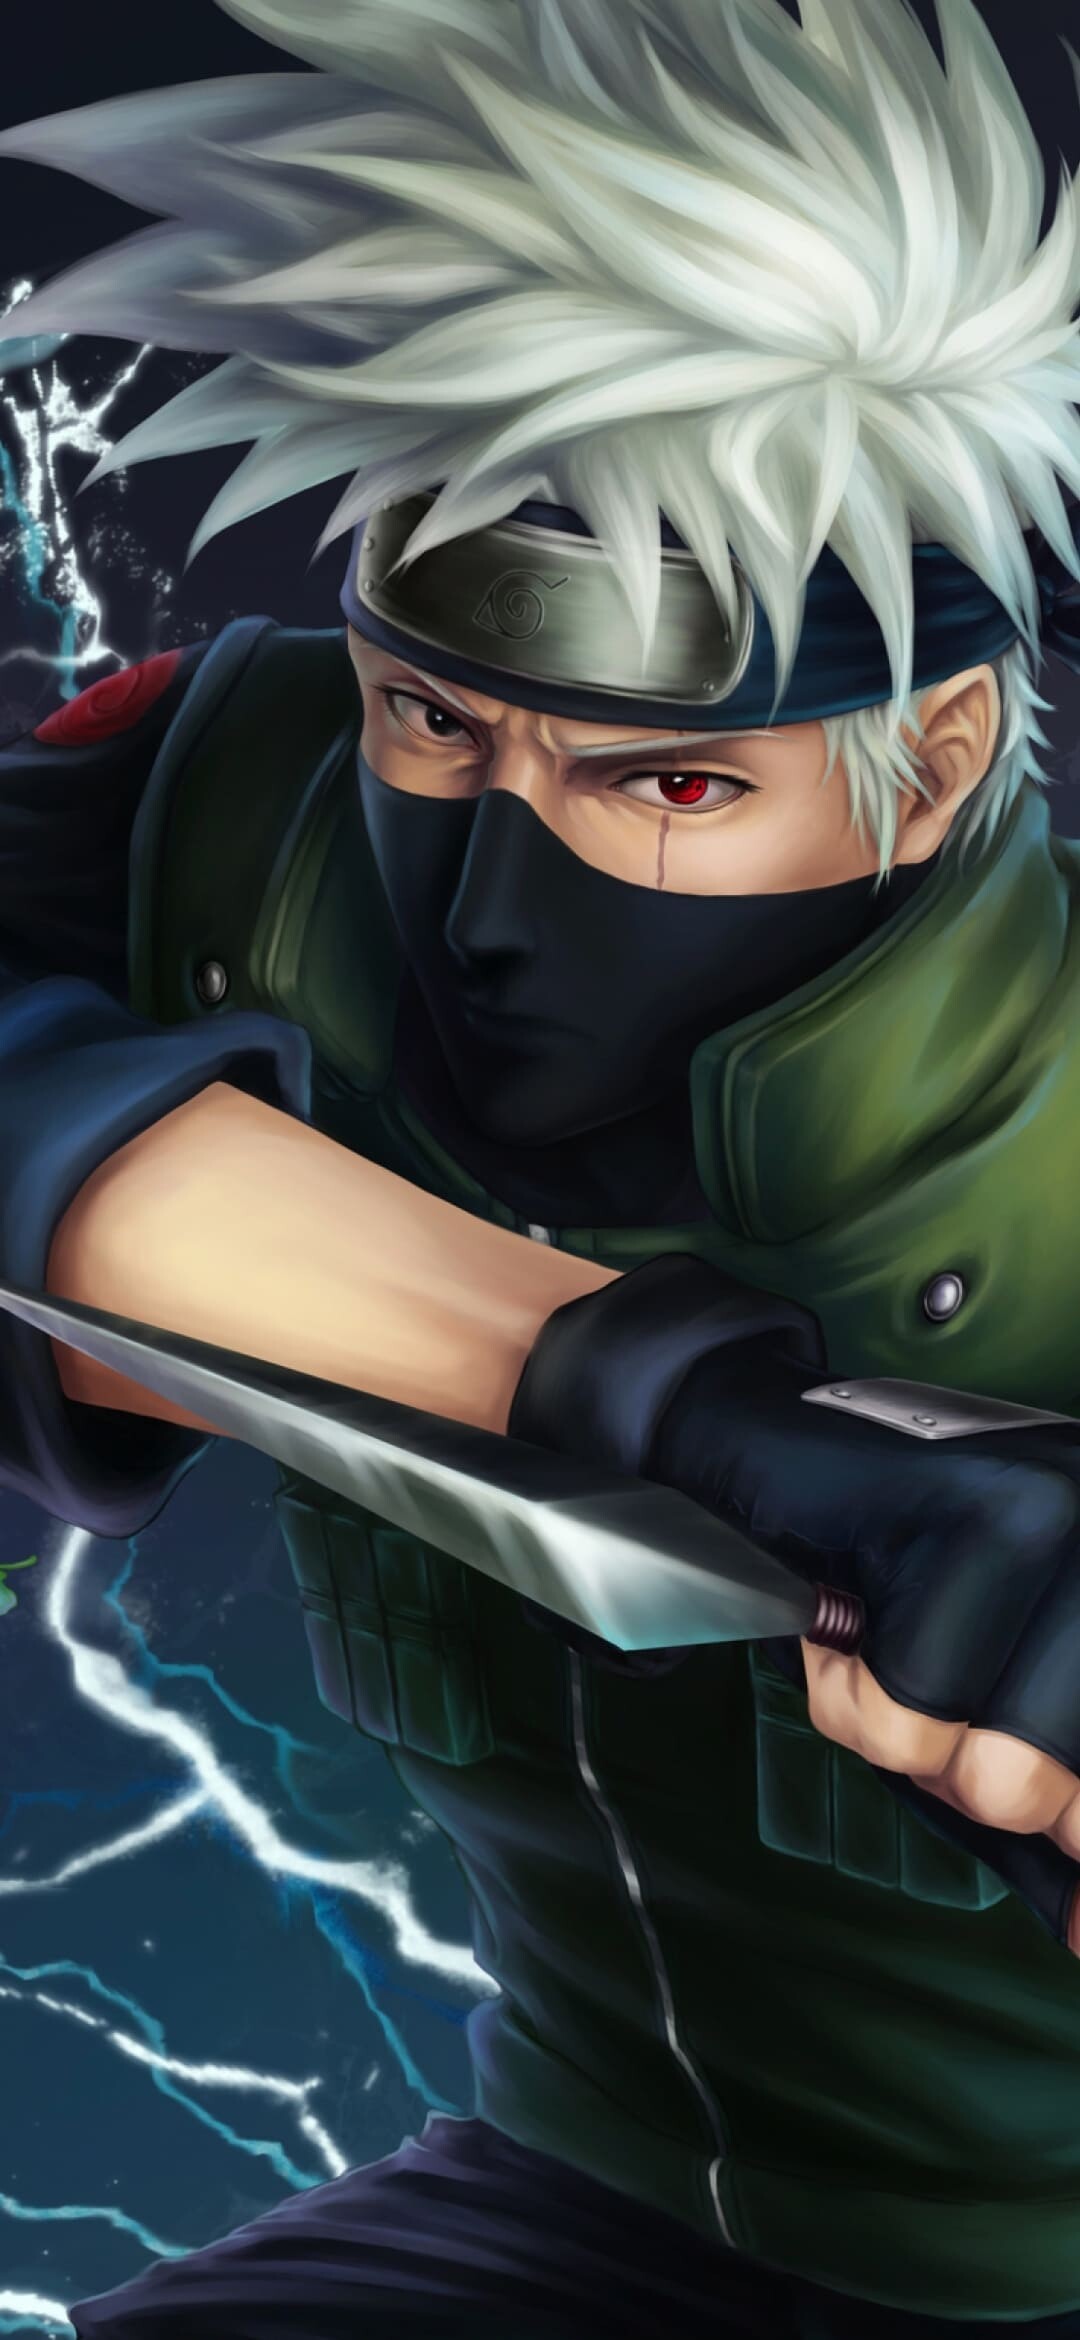 Naruto: Shonen genre anime, targeting an audience of adolescent boys and men. 1080x2340 HD Background.